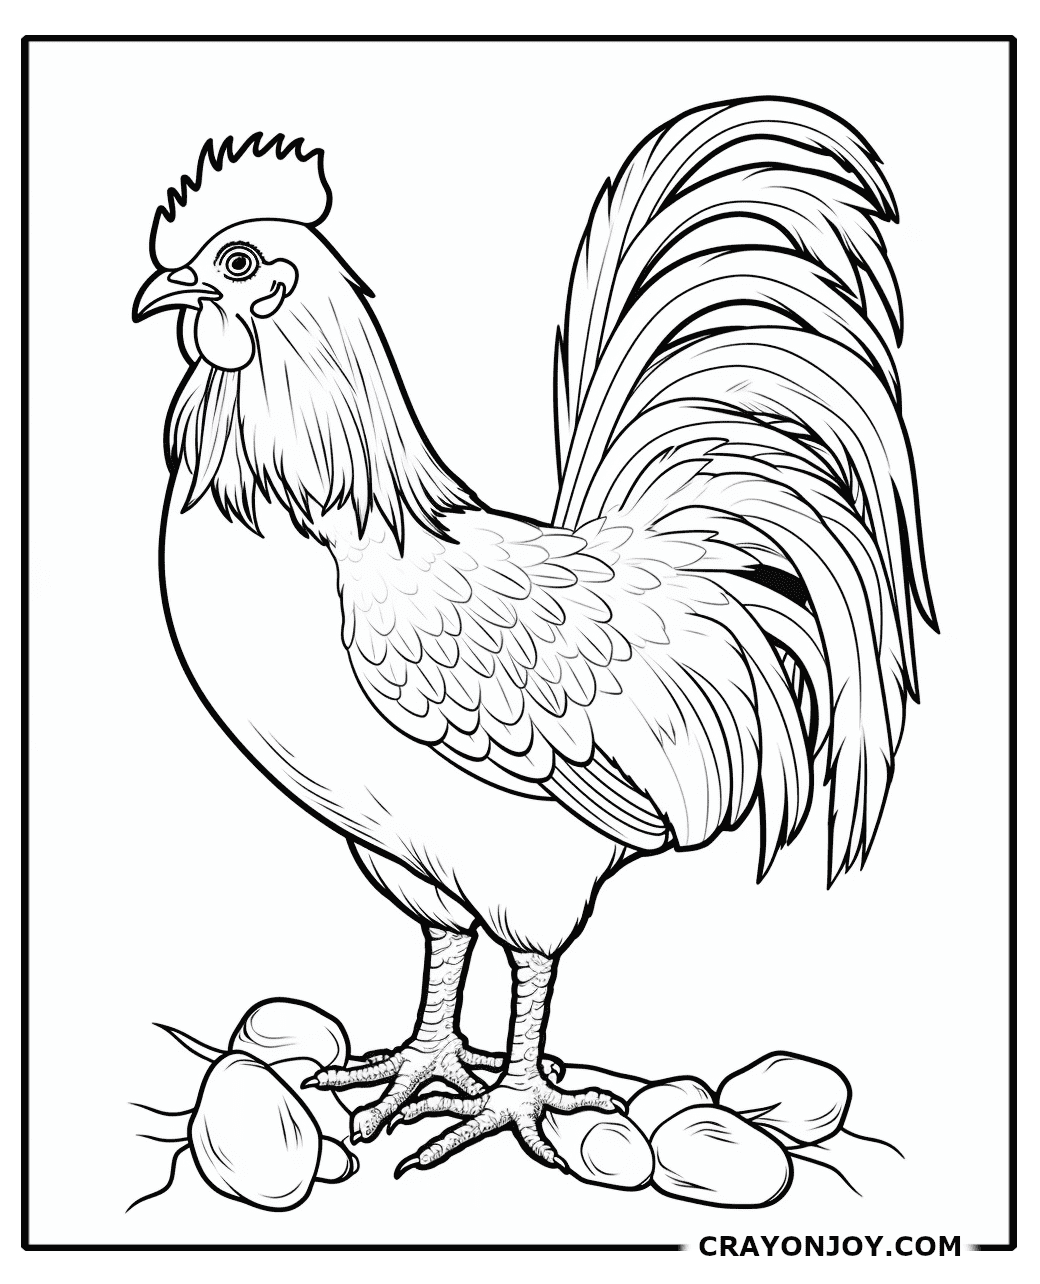 Chicken Coloring Pages: Fun and Free Printable Designs for Kids